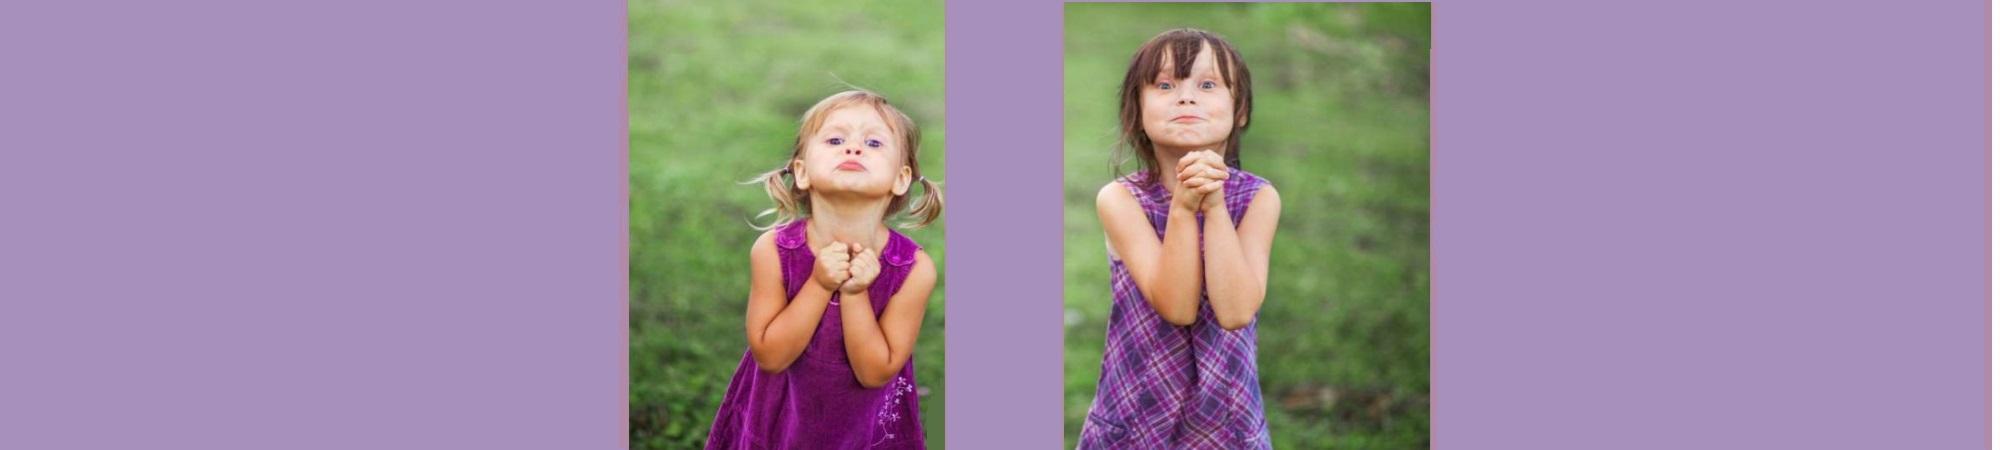 Picture of two cute kids with hands in prayer position